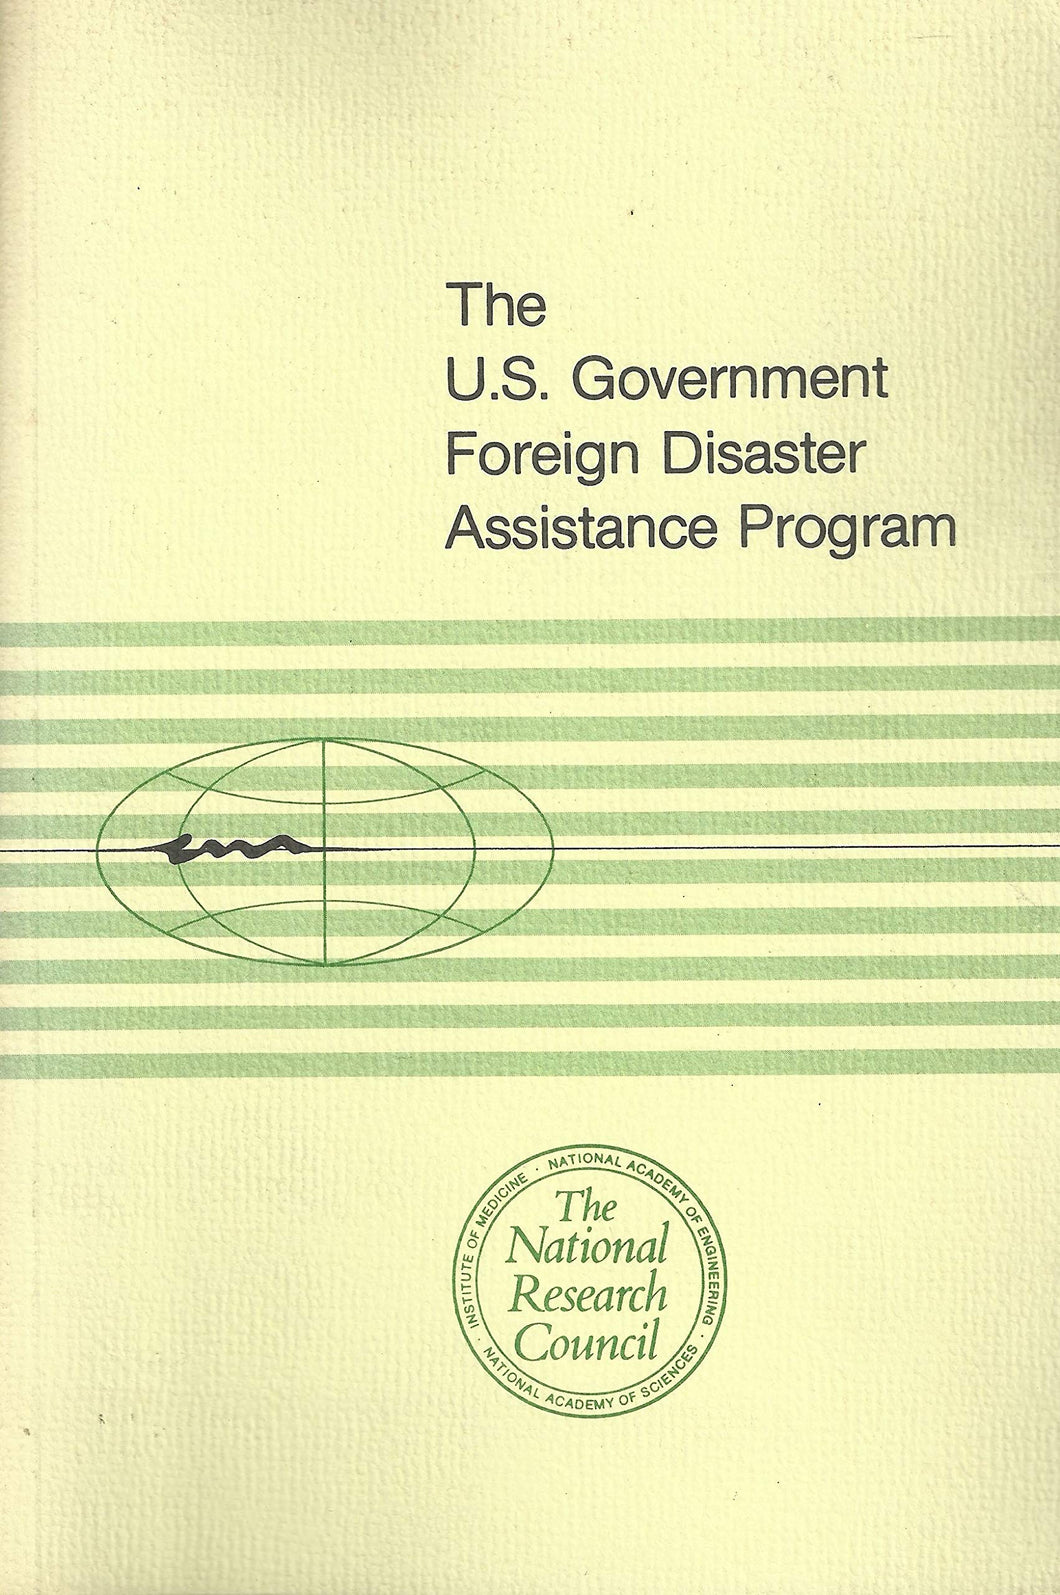 The U.S. Government Foreign Disaster Assistance Program